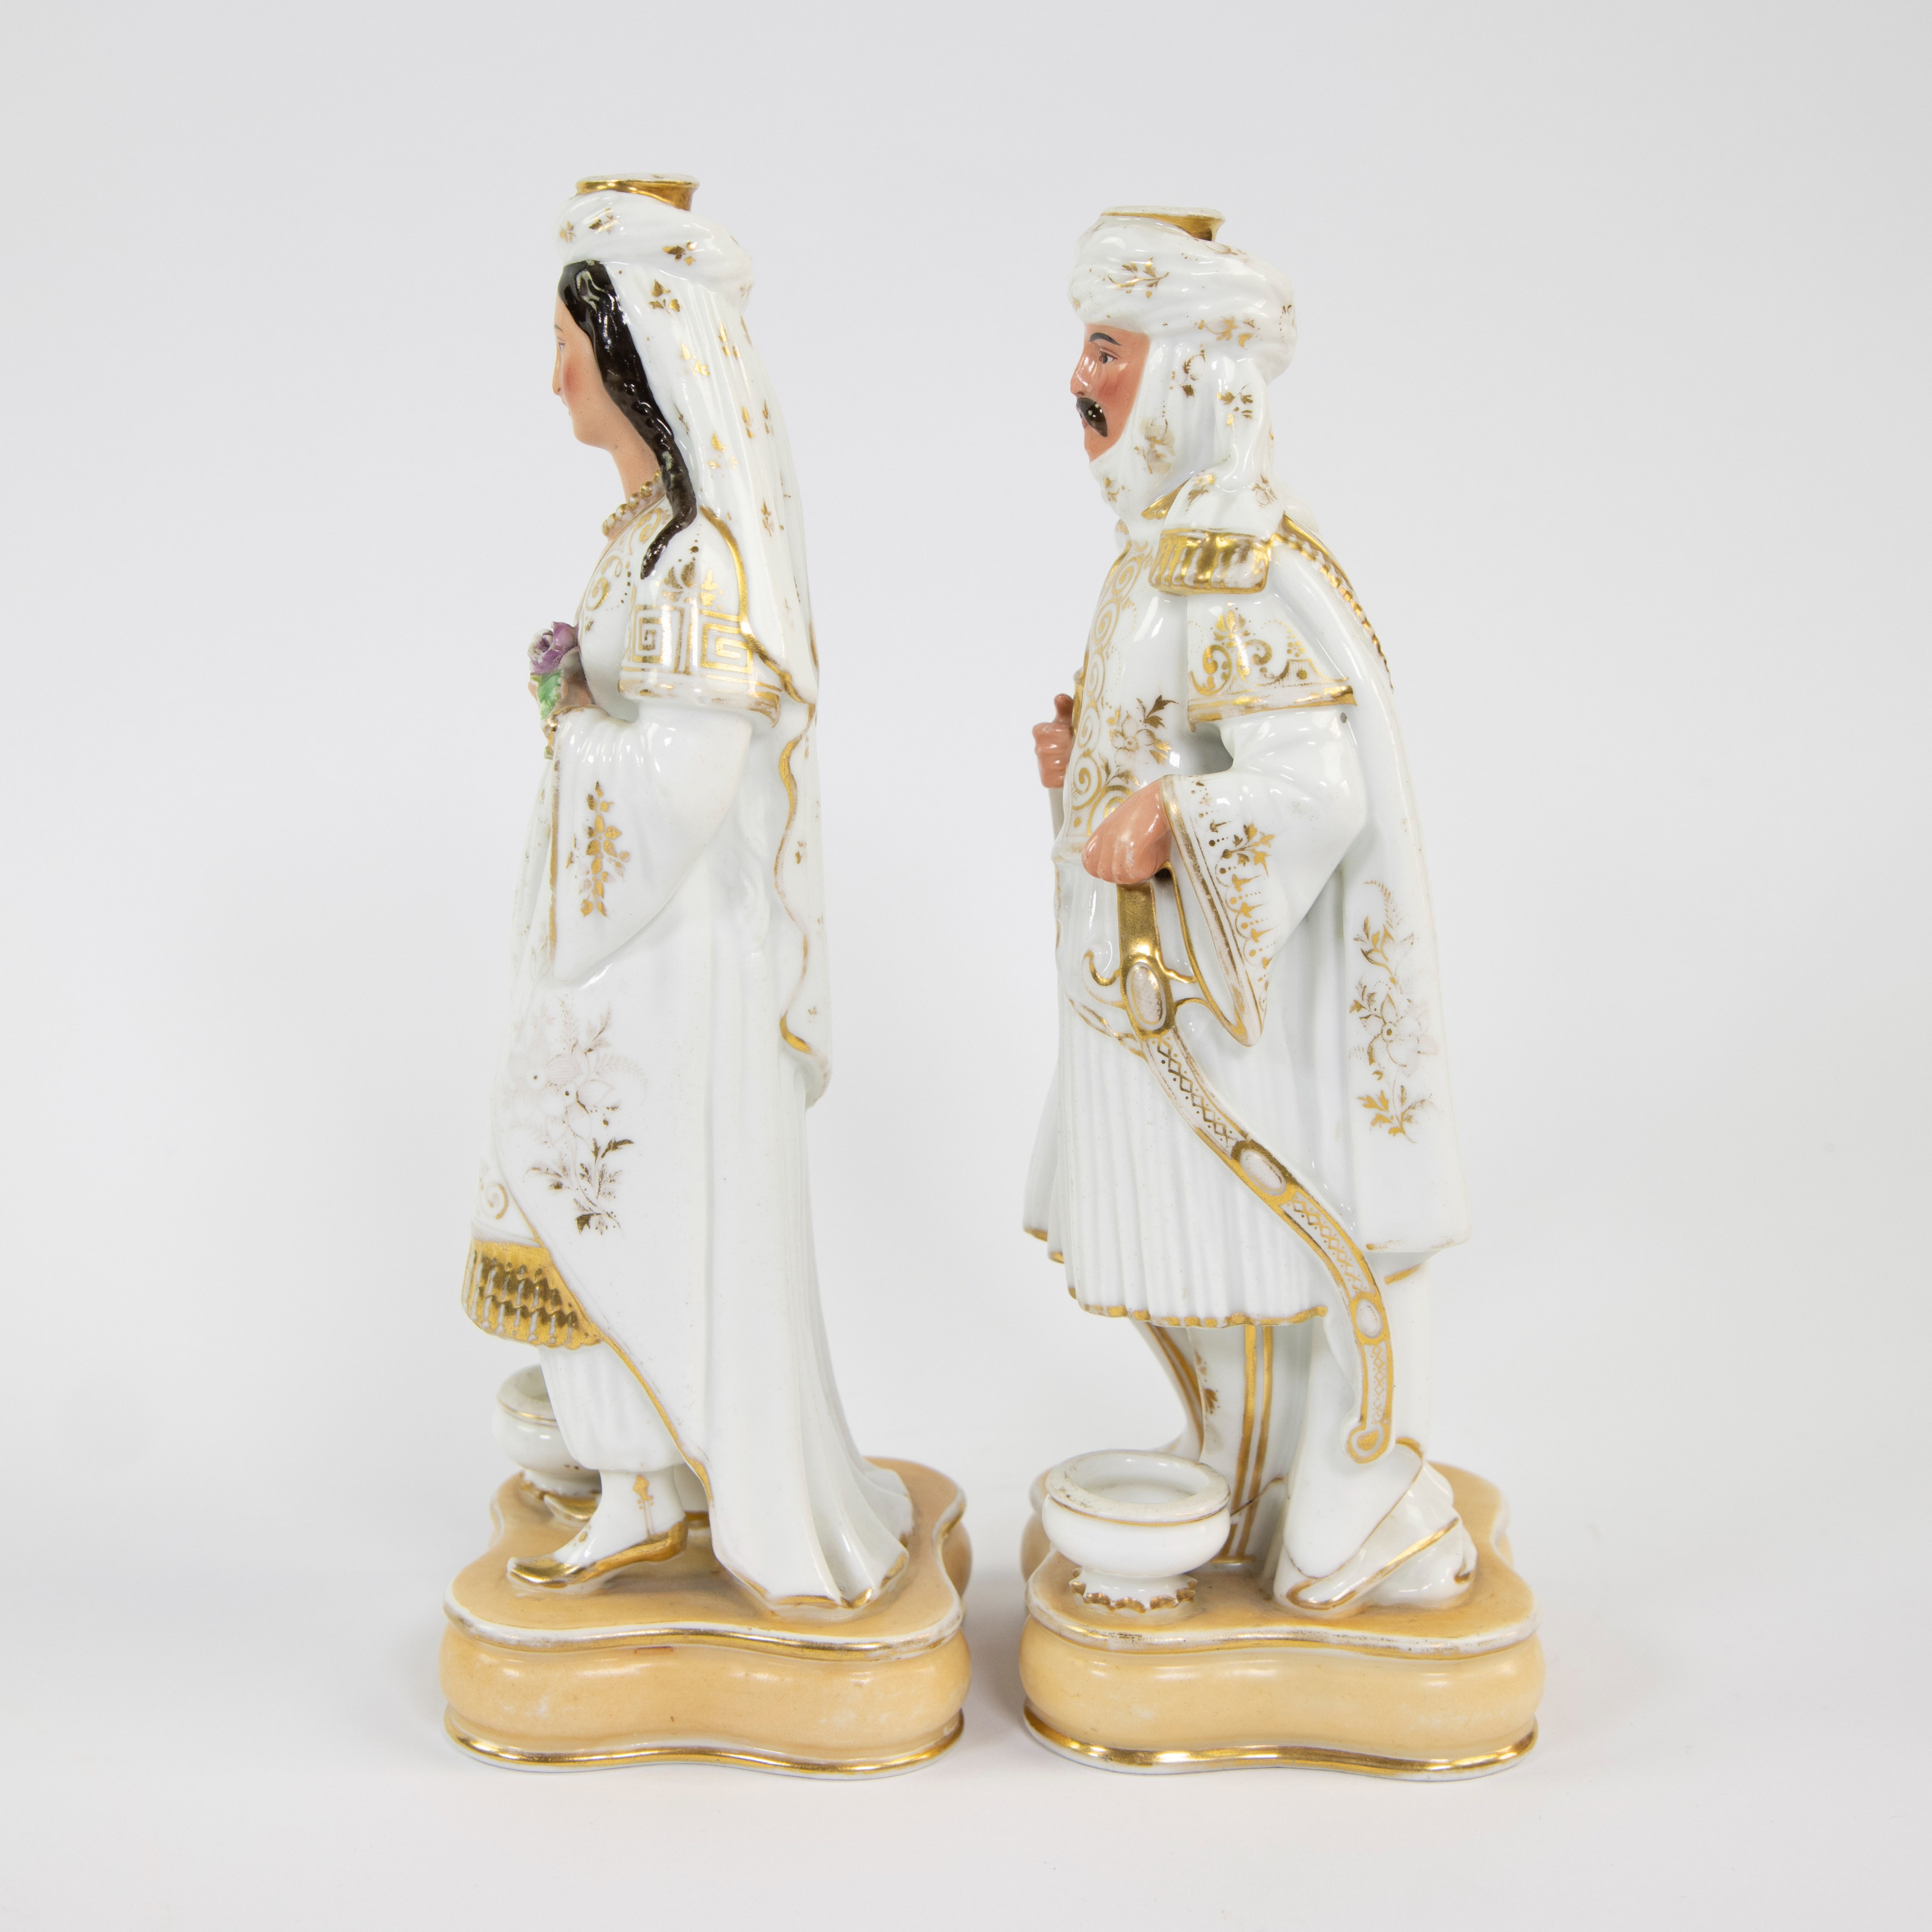 JACOB-PETIT (1796-1868), perfume bottles in the form of a Sultan and Sultana, marked j.p. - Image 2 of 6